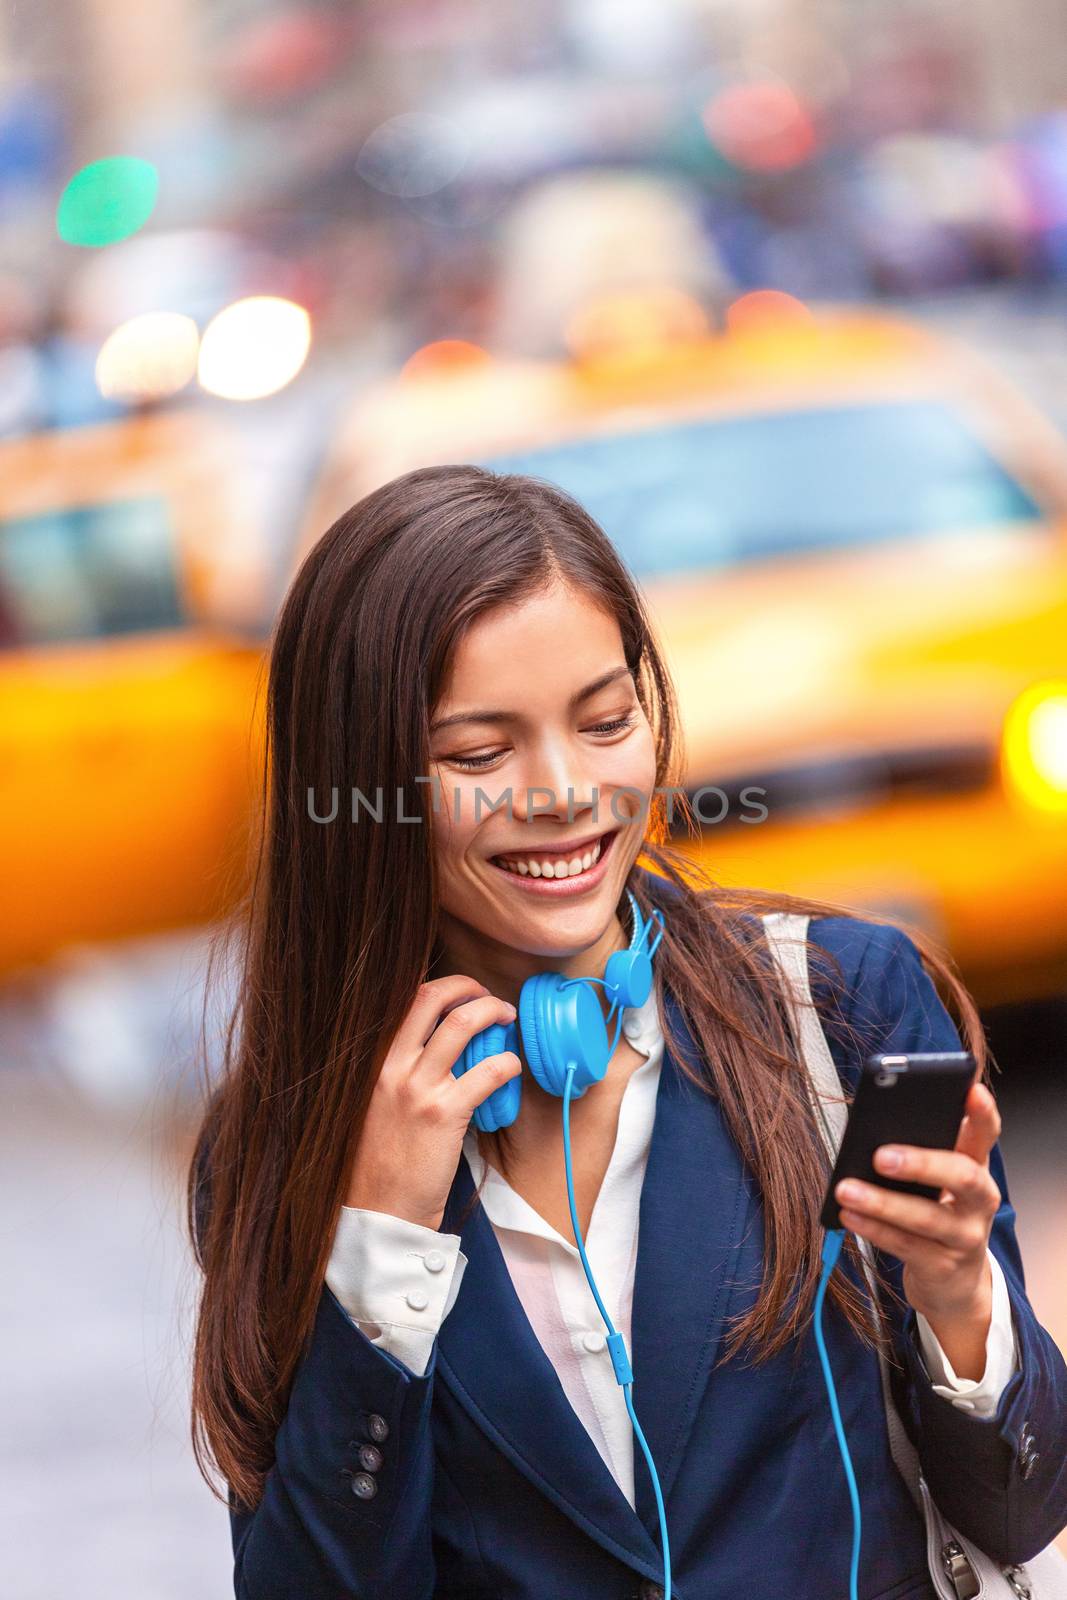 Headphones young woman walking in new york city using phone app listening to podcast or audiobook with earphones commuting from work. Asian girl businesswoman using cellphone by Maridav